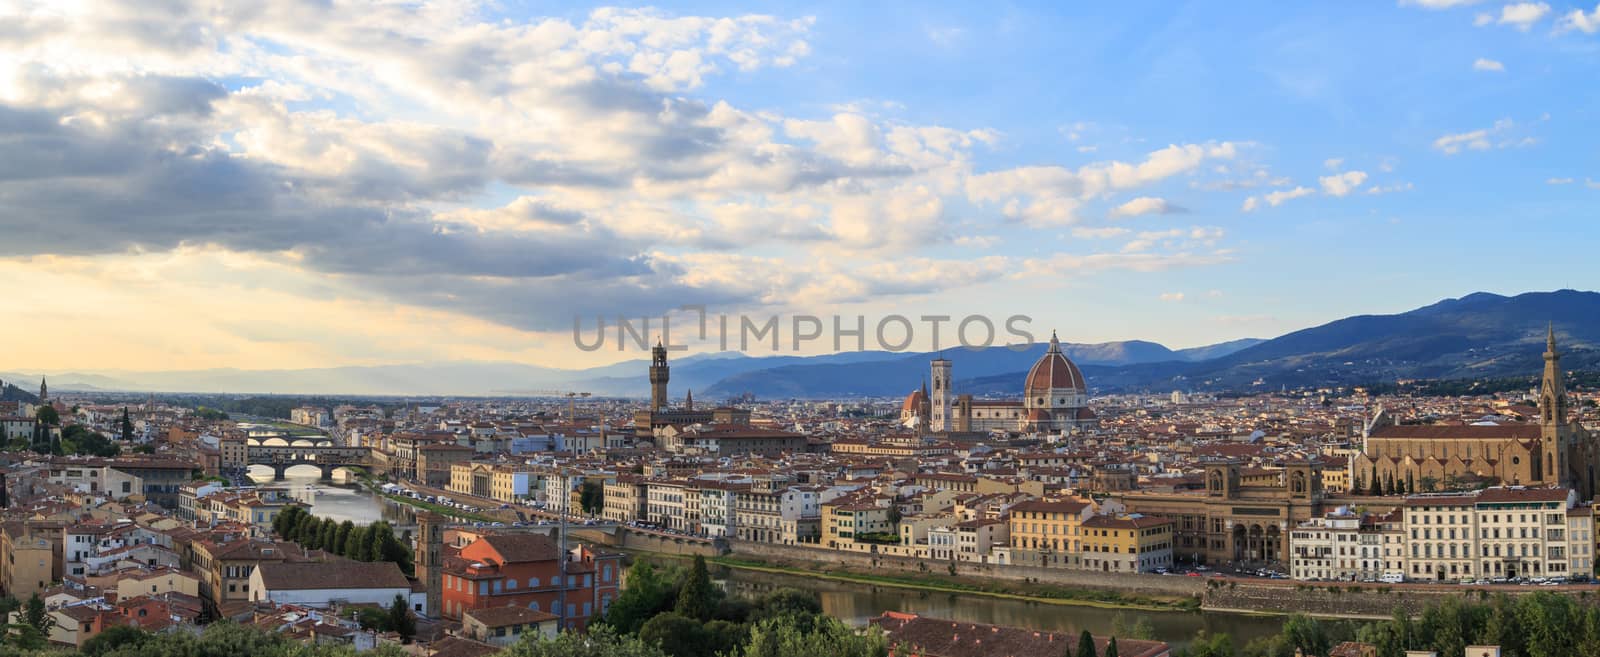 Top view of Florence city with arno river bridges and historical buildings, on cloudy sunrise or sunset sky background.